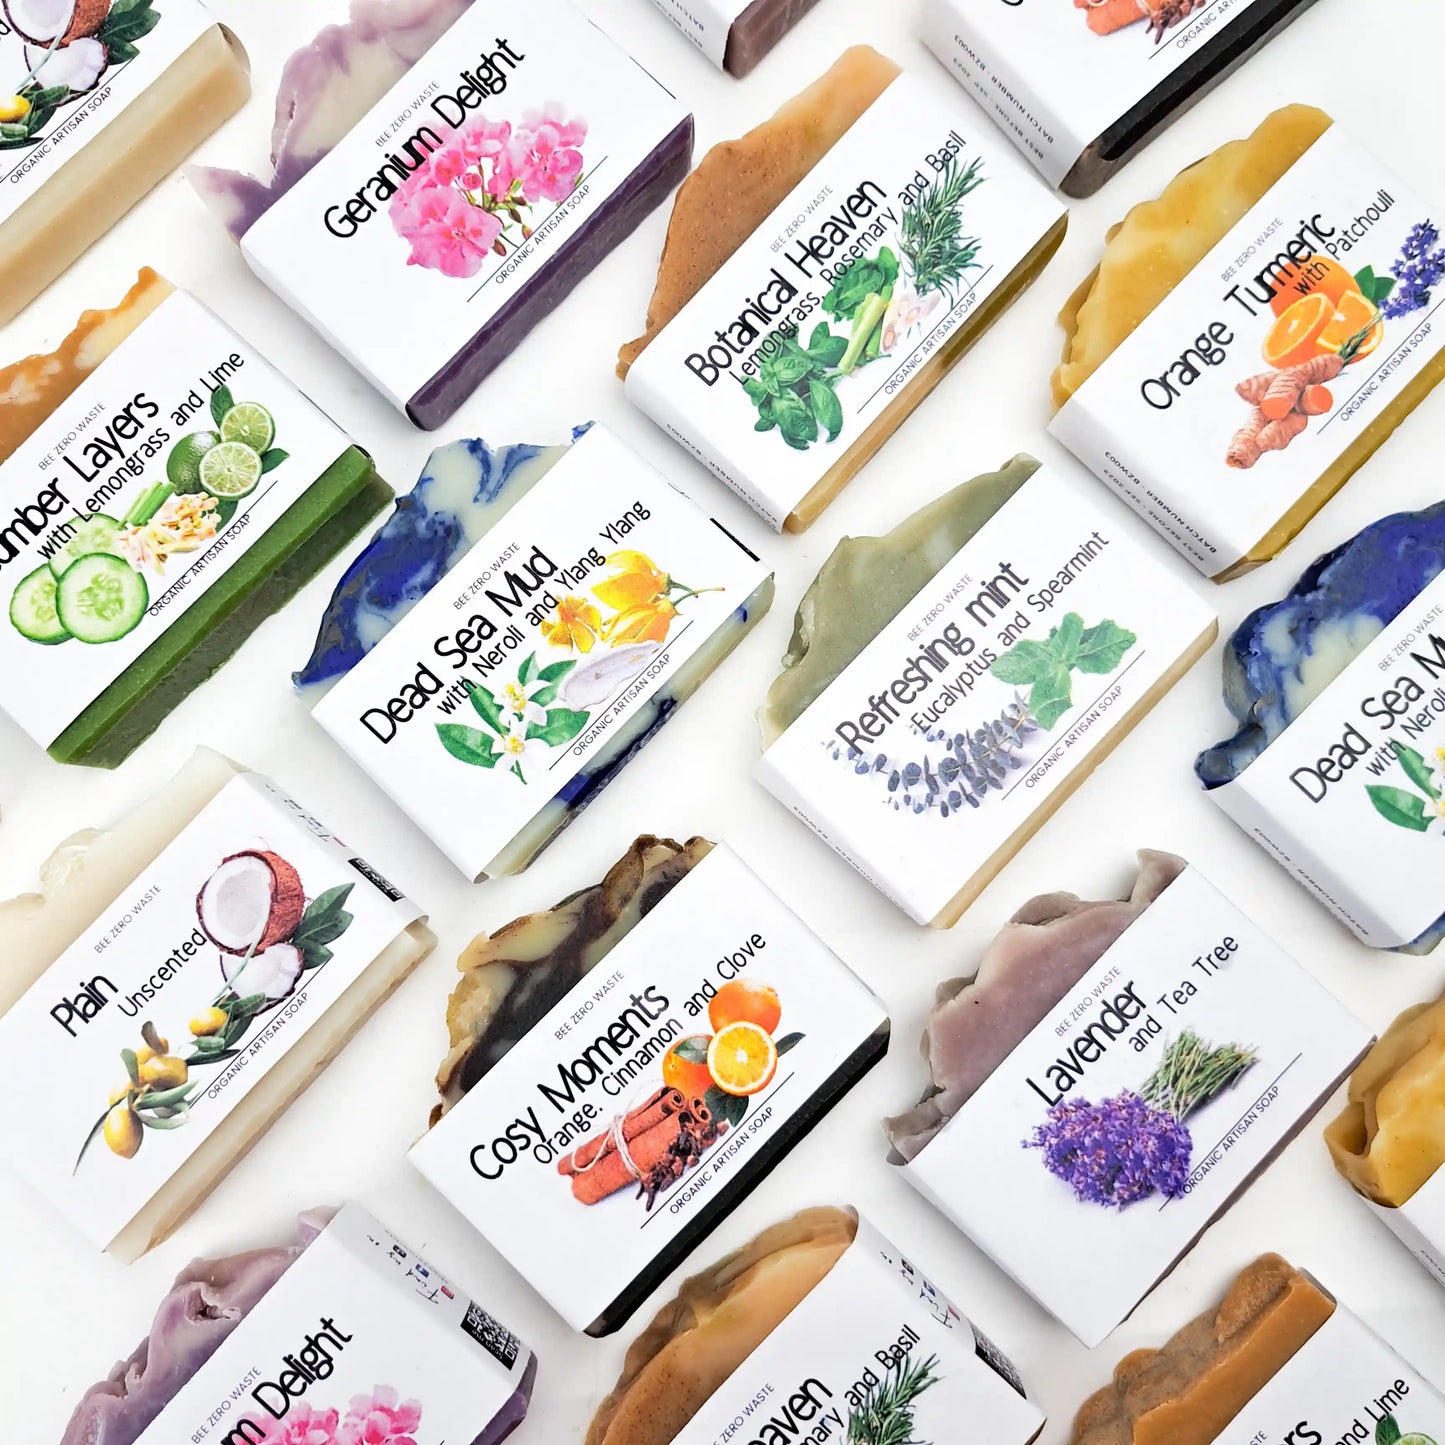 Vegan-Friendly Natural Soap Collection: Indulge in Floral Elegance, Herbal Freshness, and Citrus Vibrance